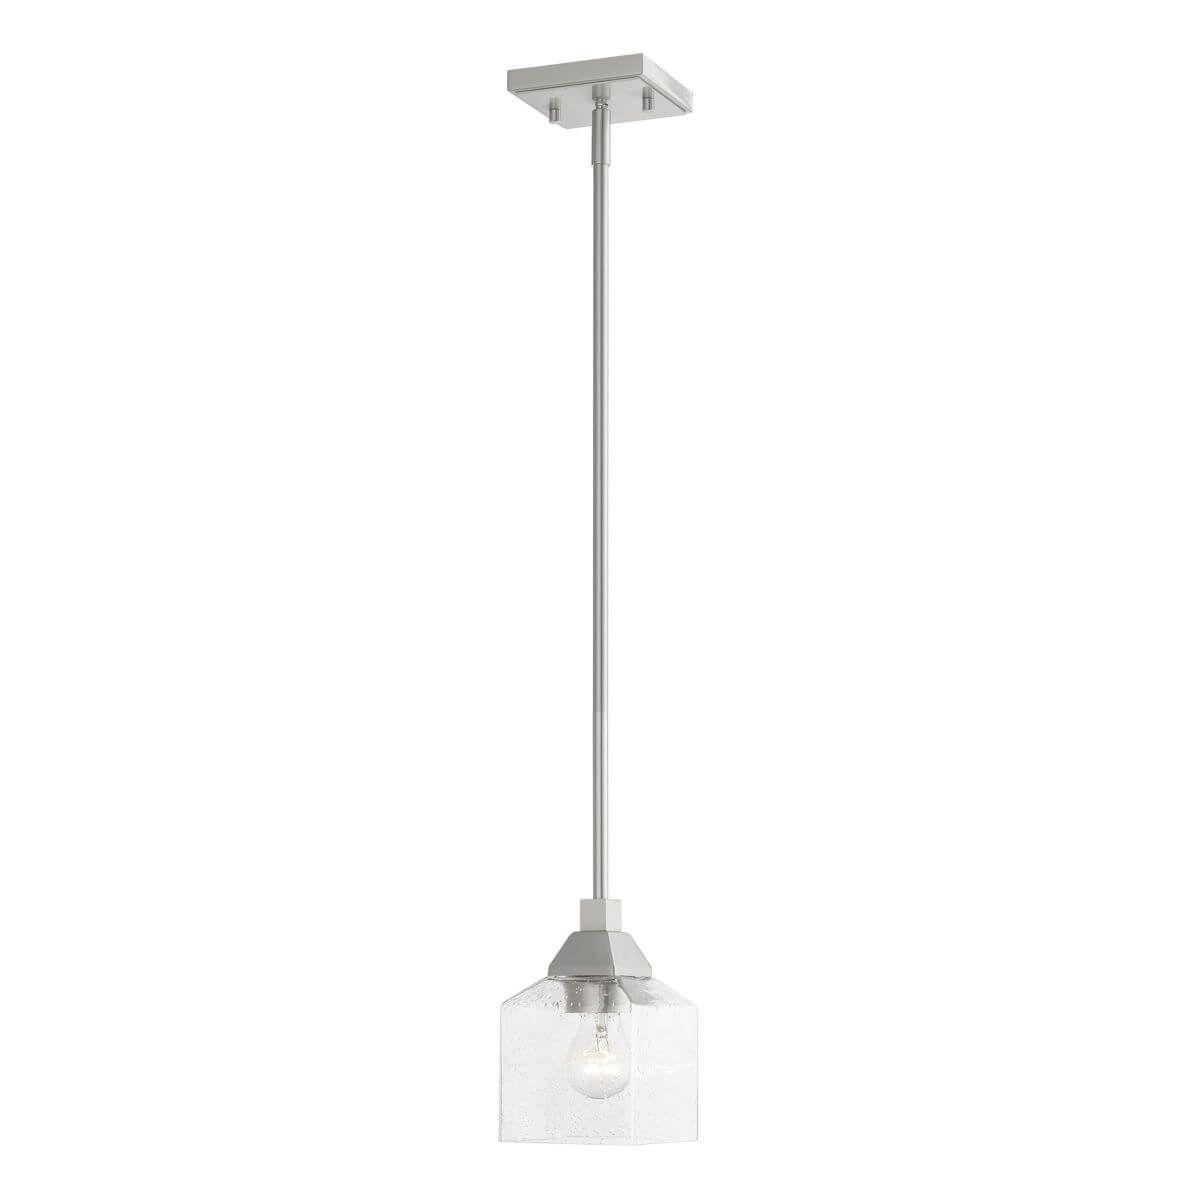 Livex 49761-91 Aragon 1 Light 5 inch Mini Pendant in Brushed Nickel with Clear Seeded Glass